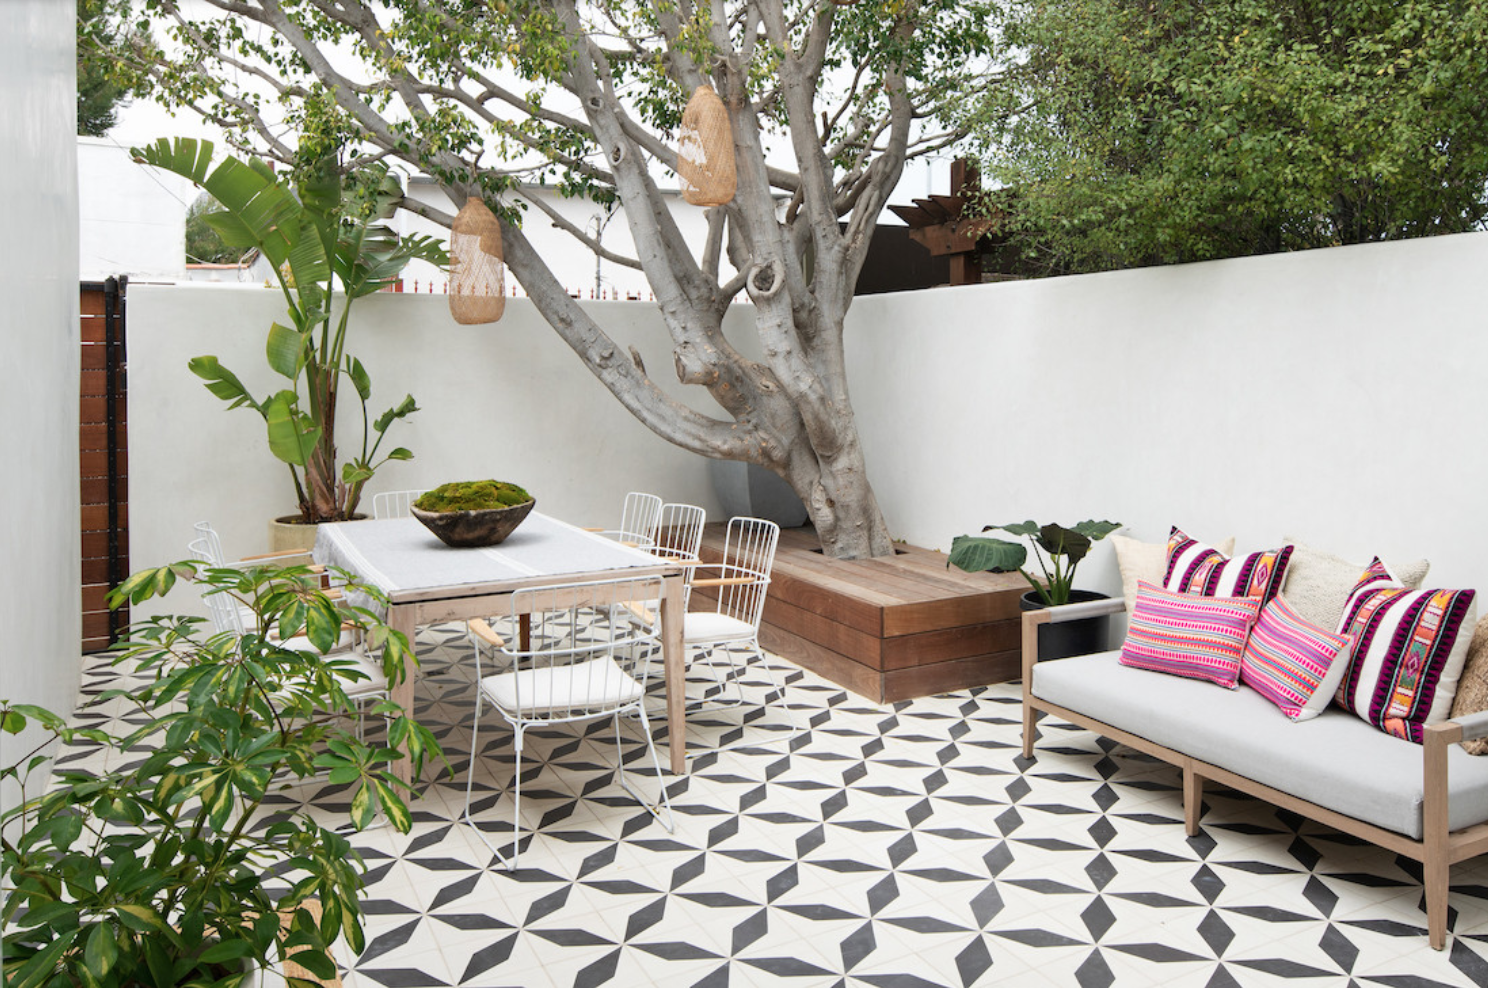 Creative Ways to Achieve a Beautiful Patio Design without Breaking the Bank